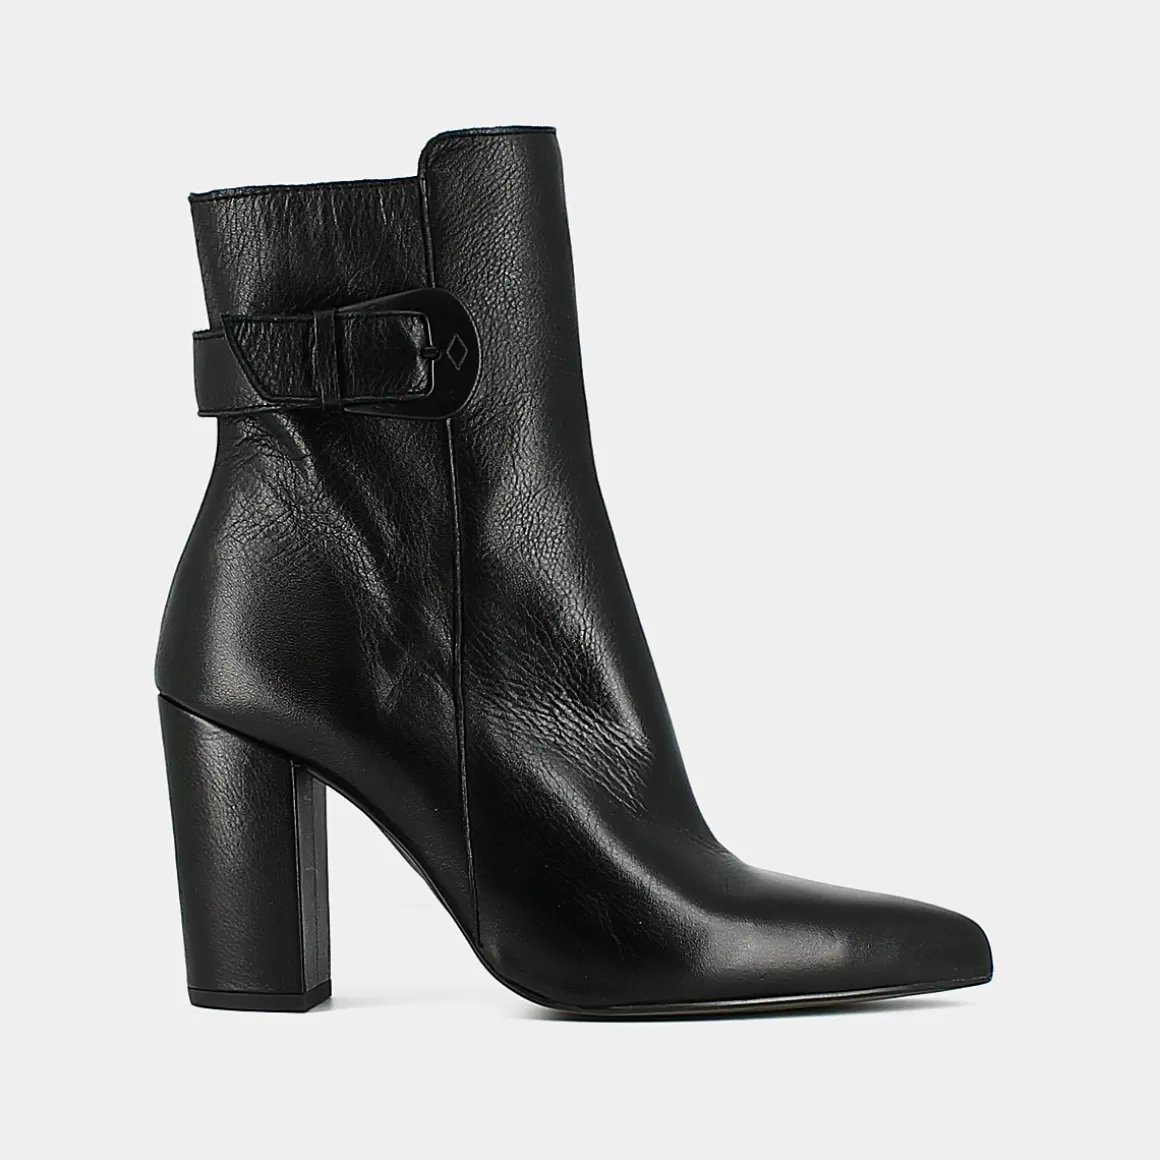 Pointed toe boots with buckles<Jonak Clearance